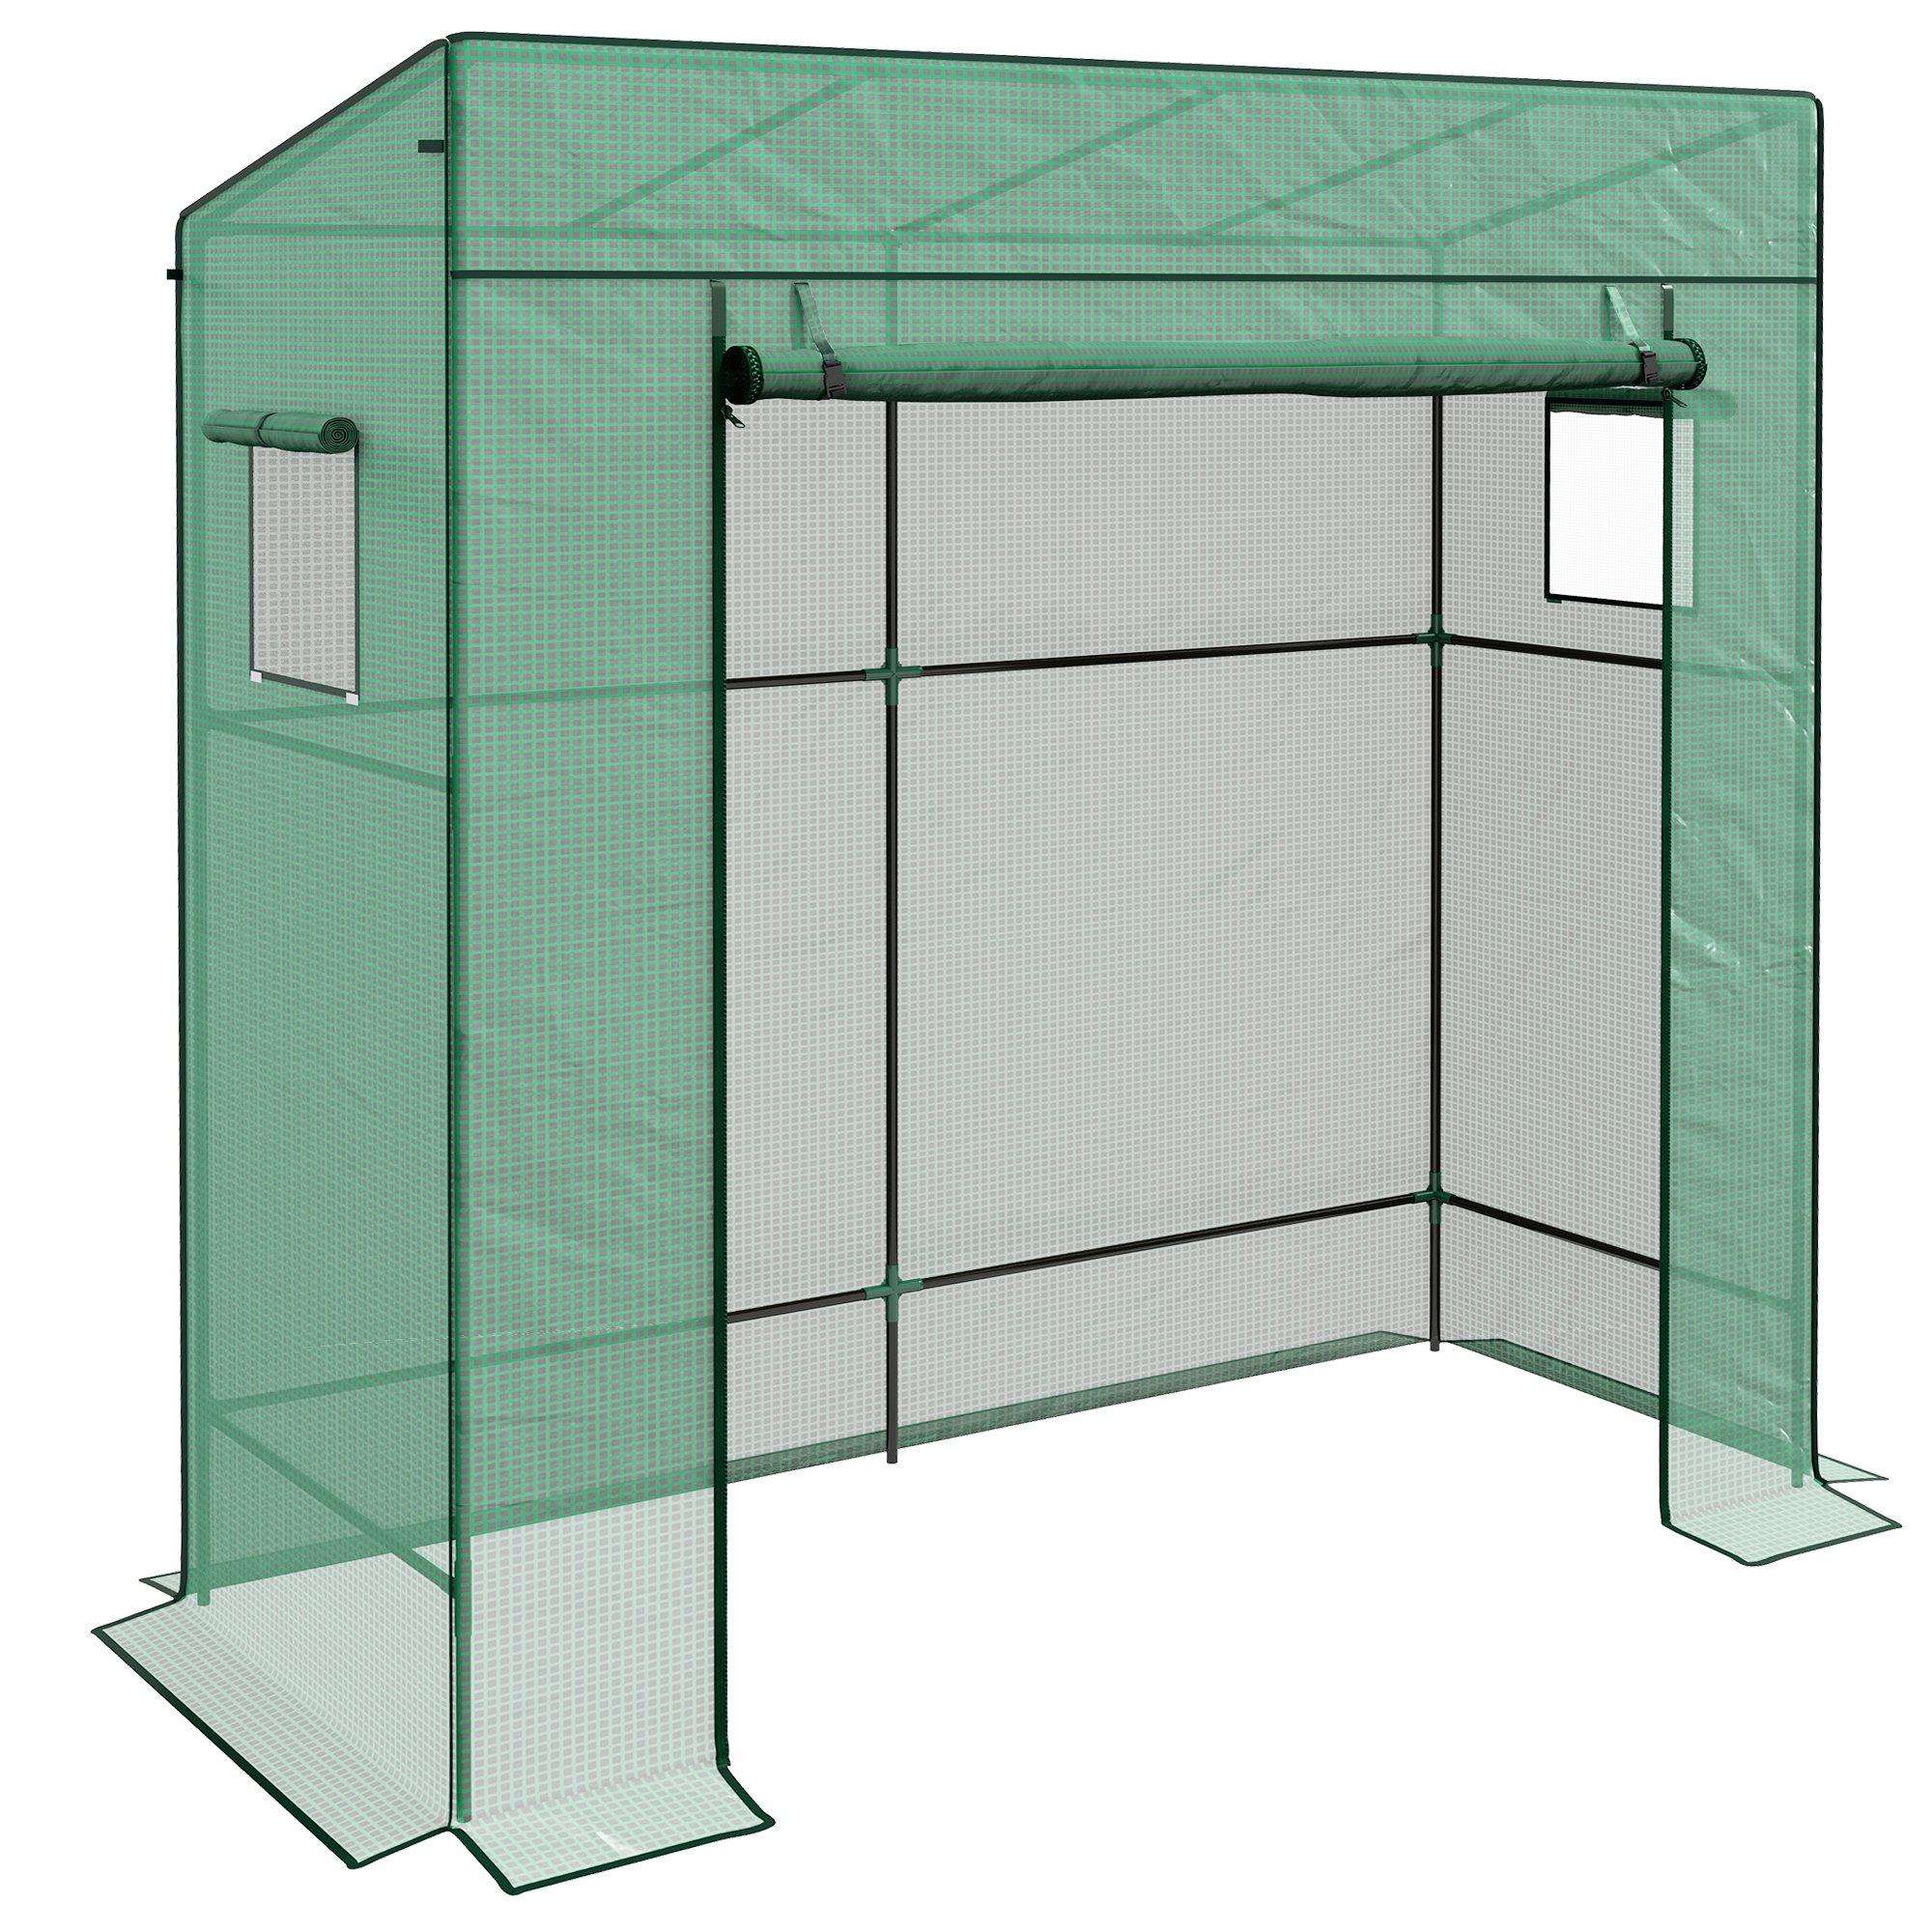 Lean-to Greenhouse Portable Walk-in Tomato Growhouse with Roll-up Door